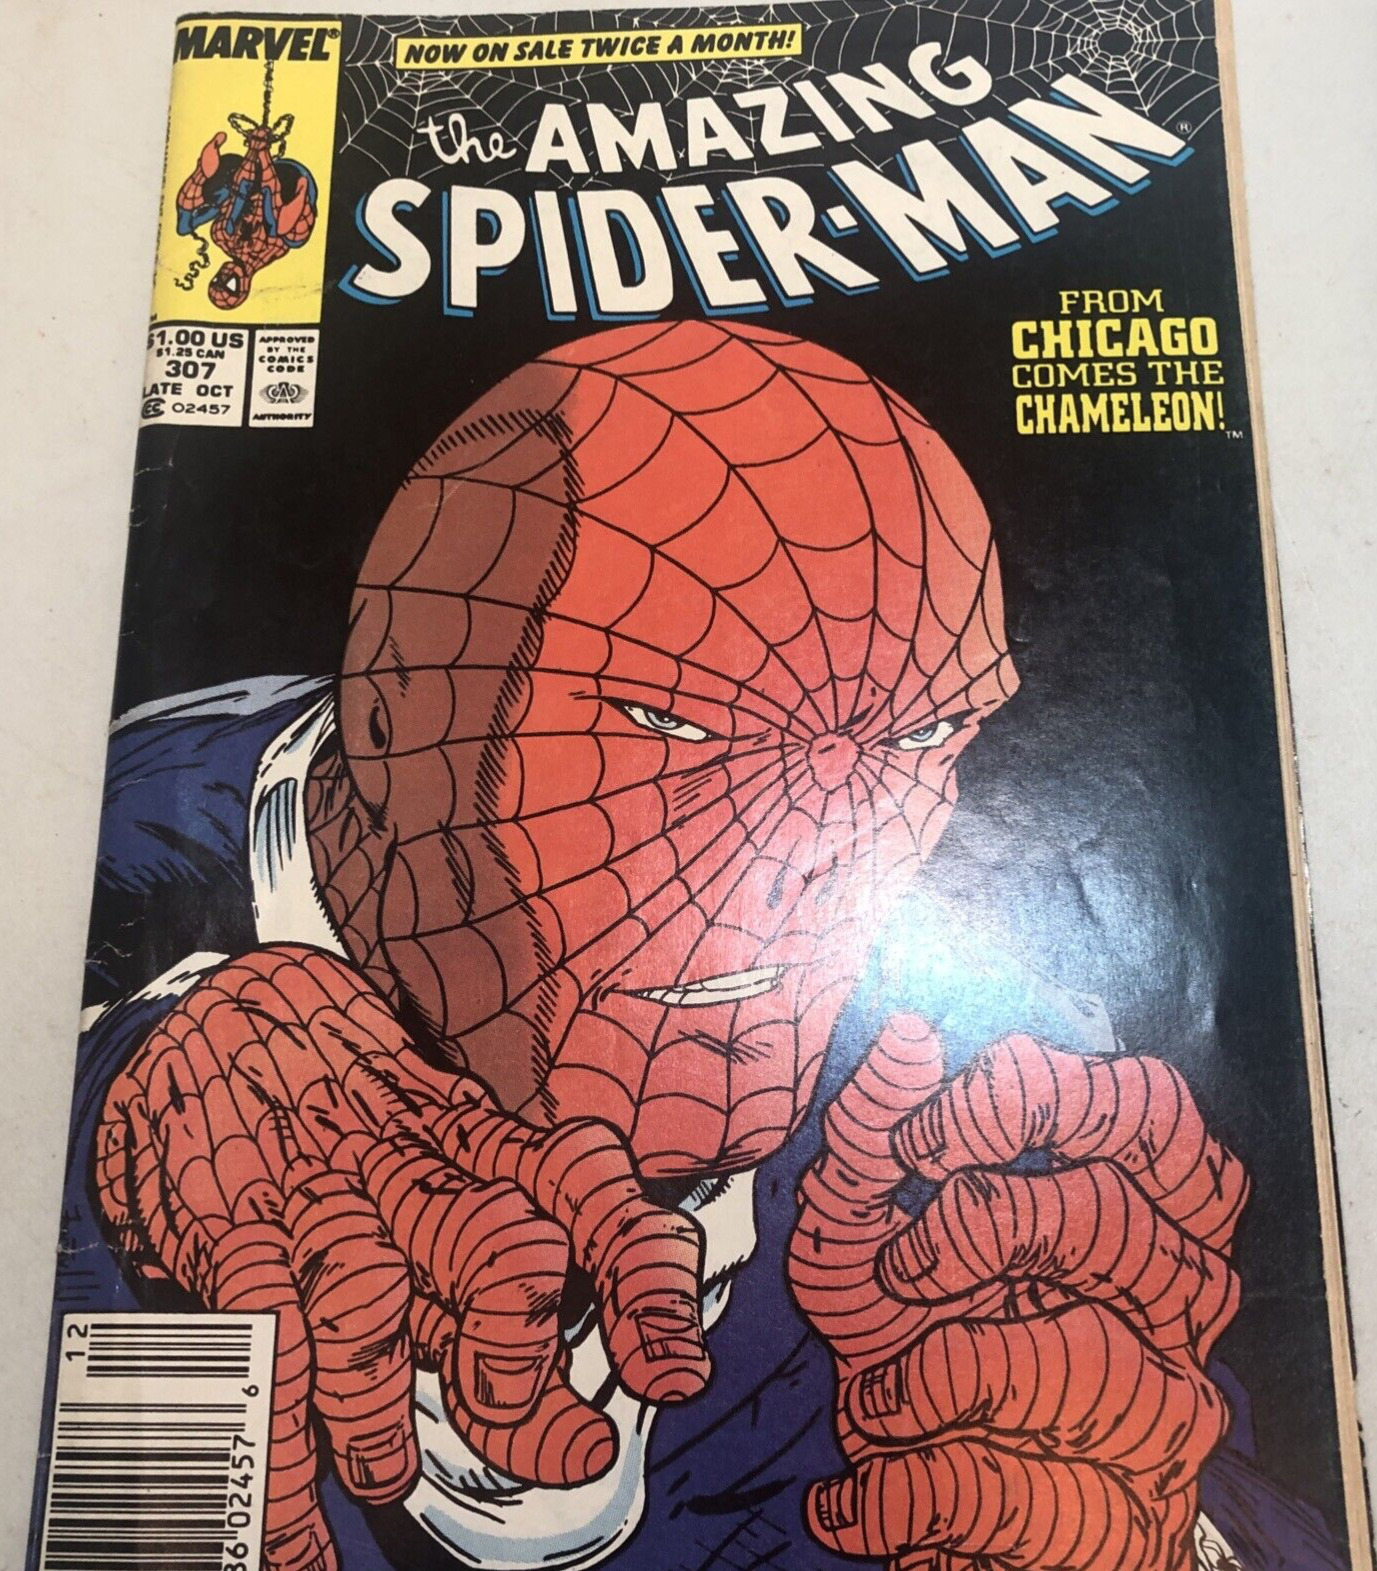 The Amazing Spider-Man from Chicago Comes The Chameleon 1988